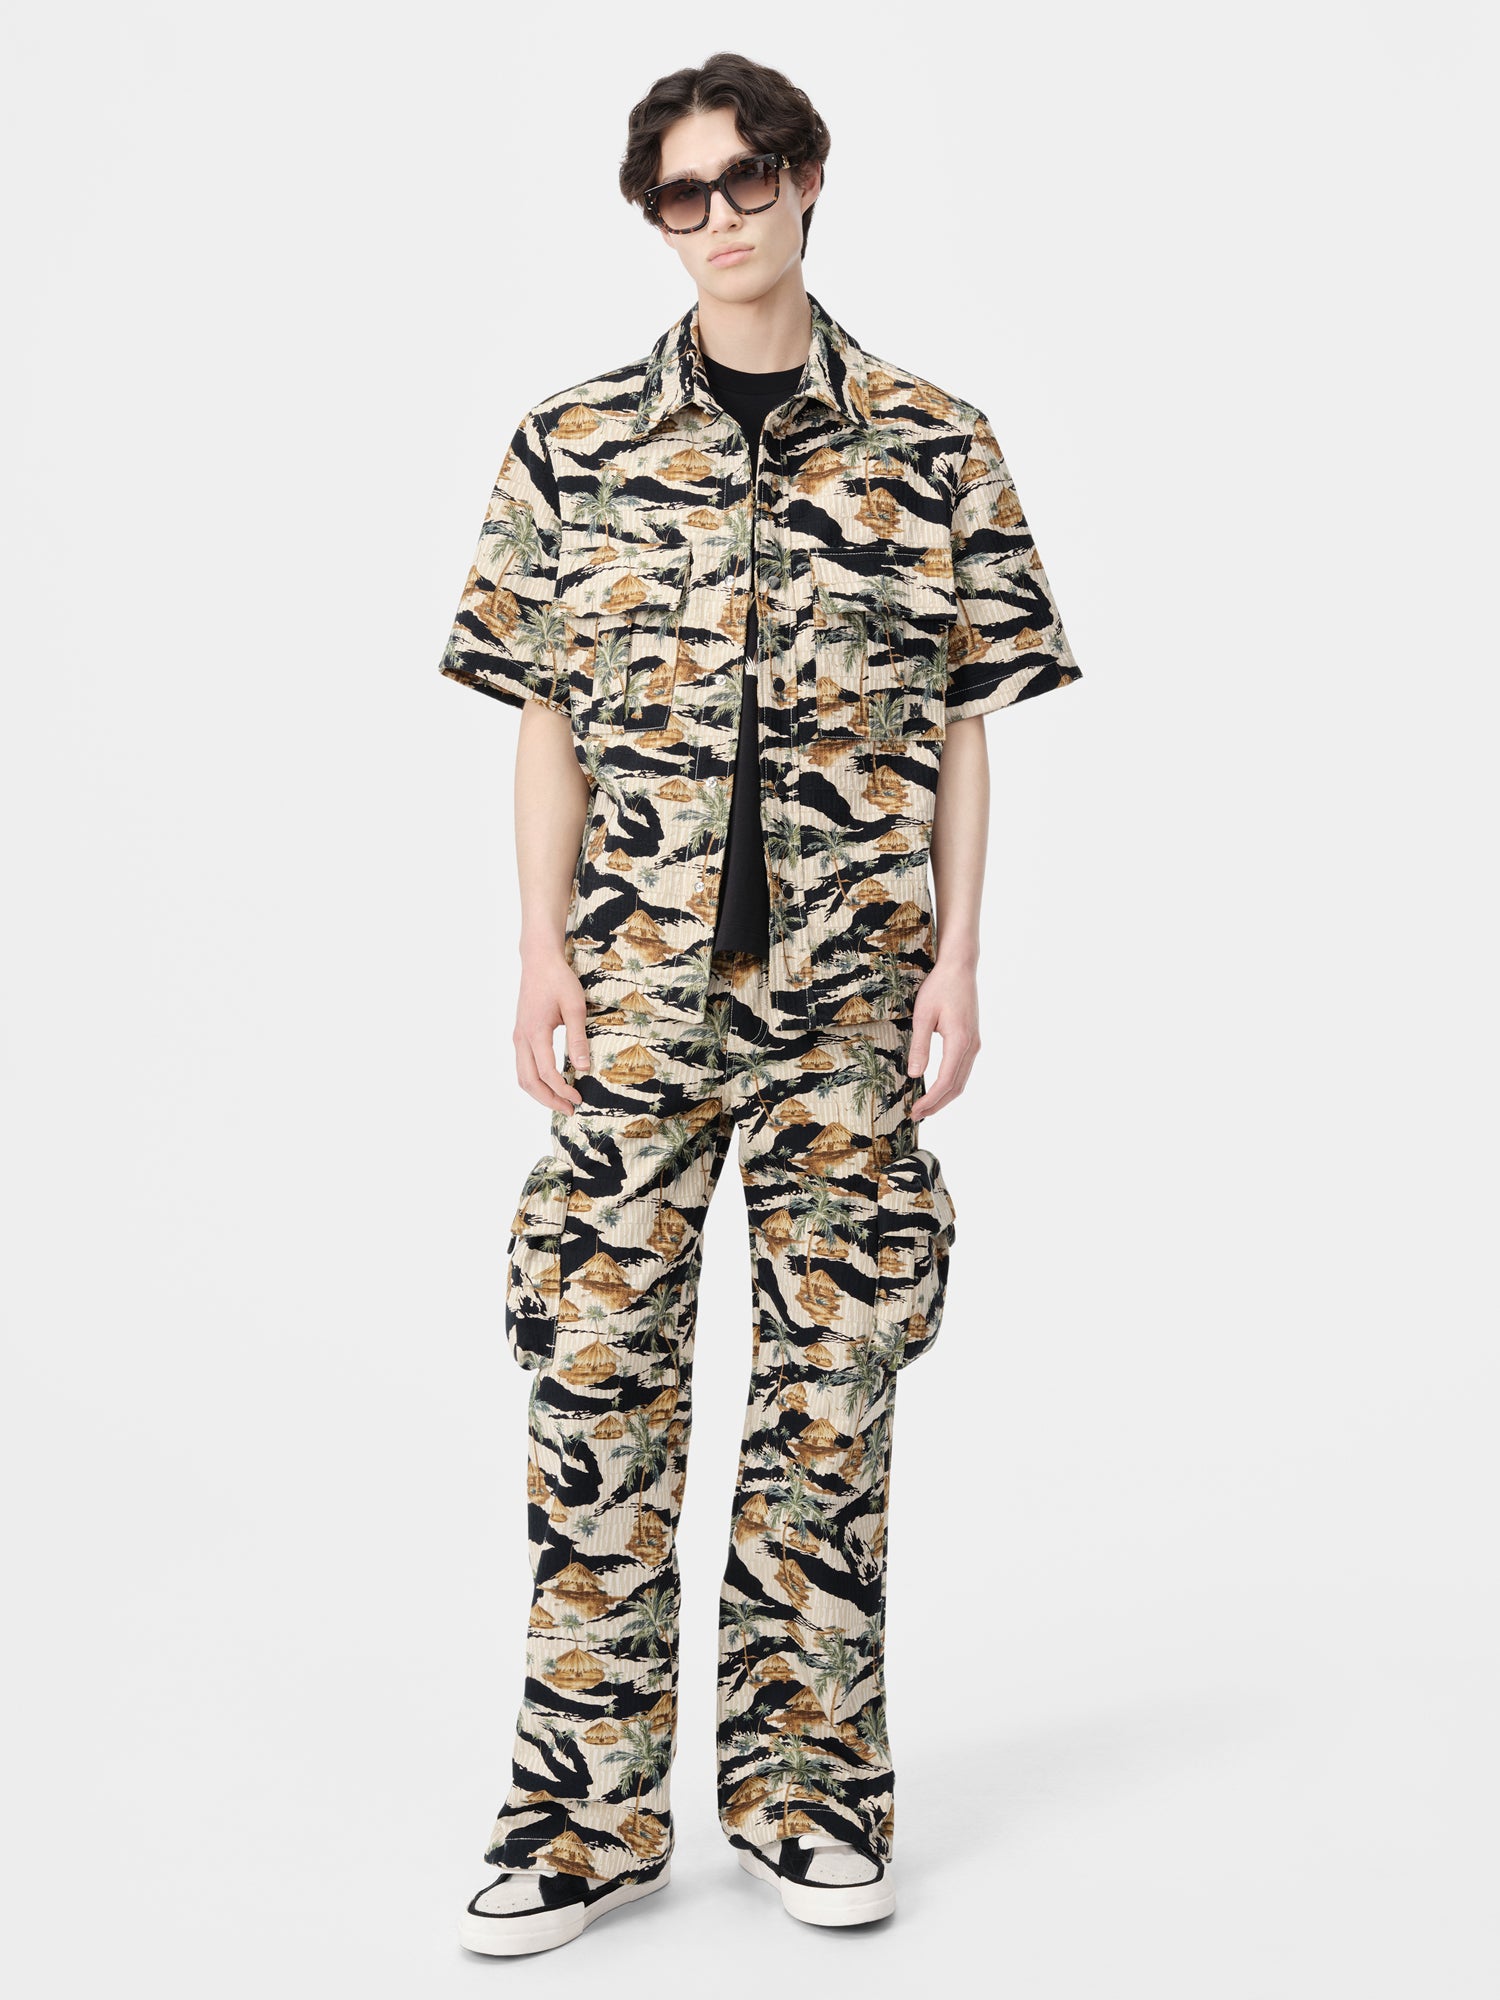 Product AMIRI REPEAT PALM BAGGY M65 CARGO - Mojave Desert featured image